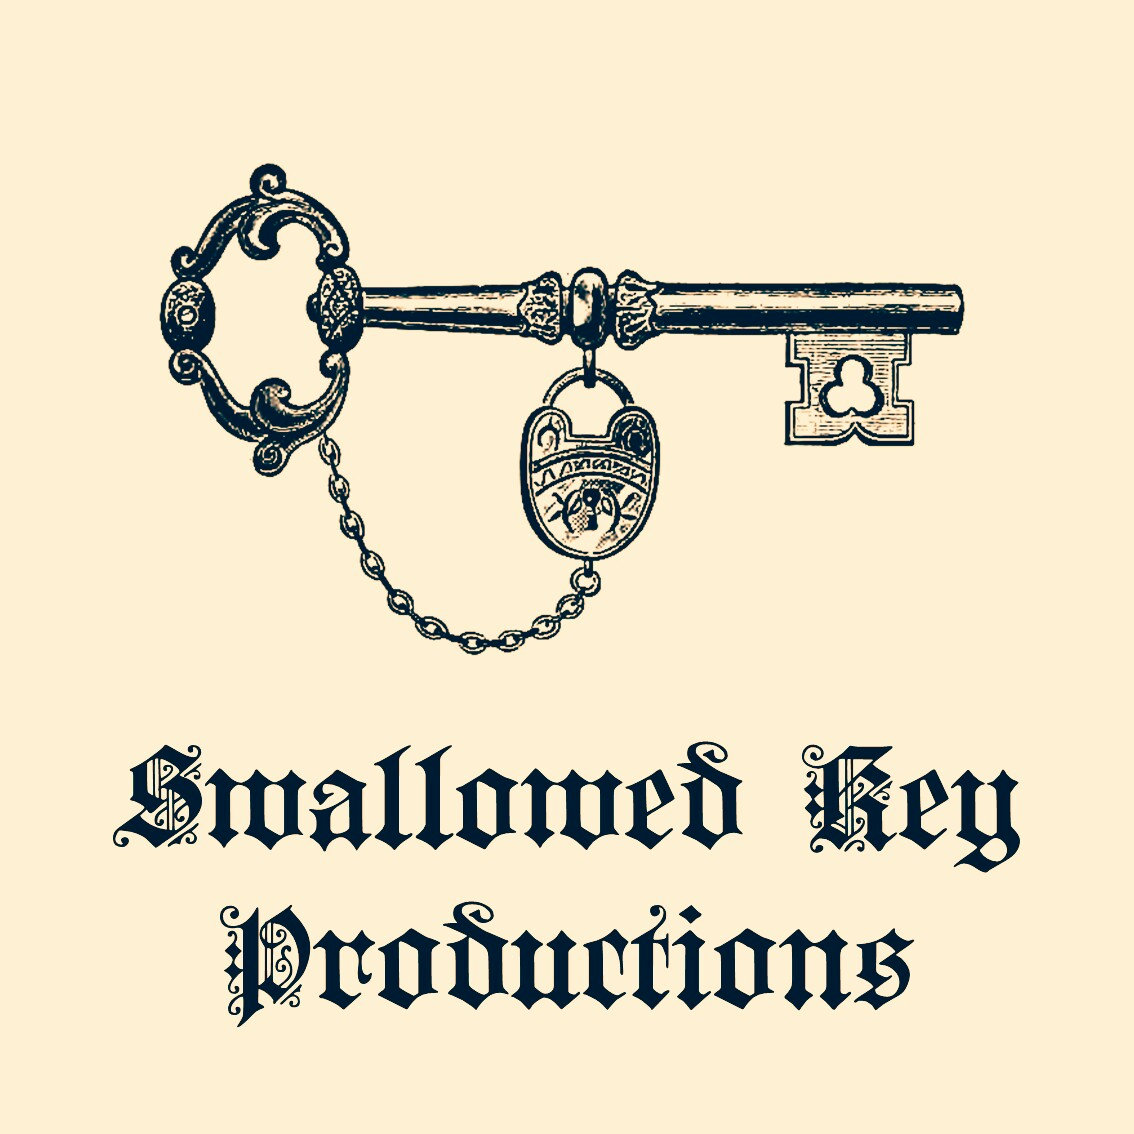 Swallowed Key Productions